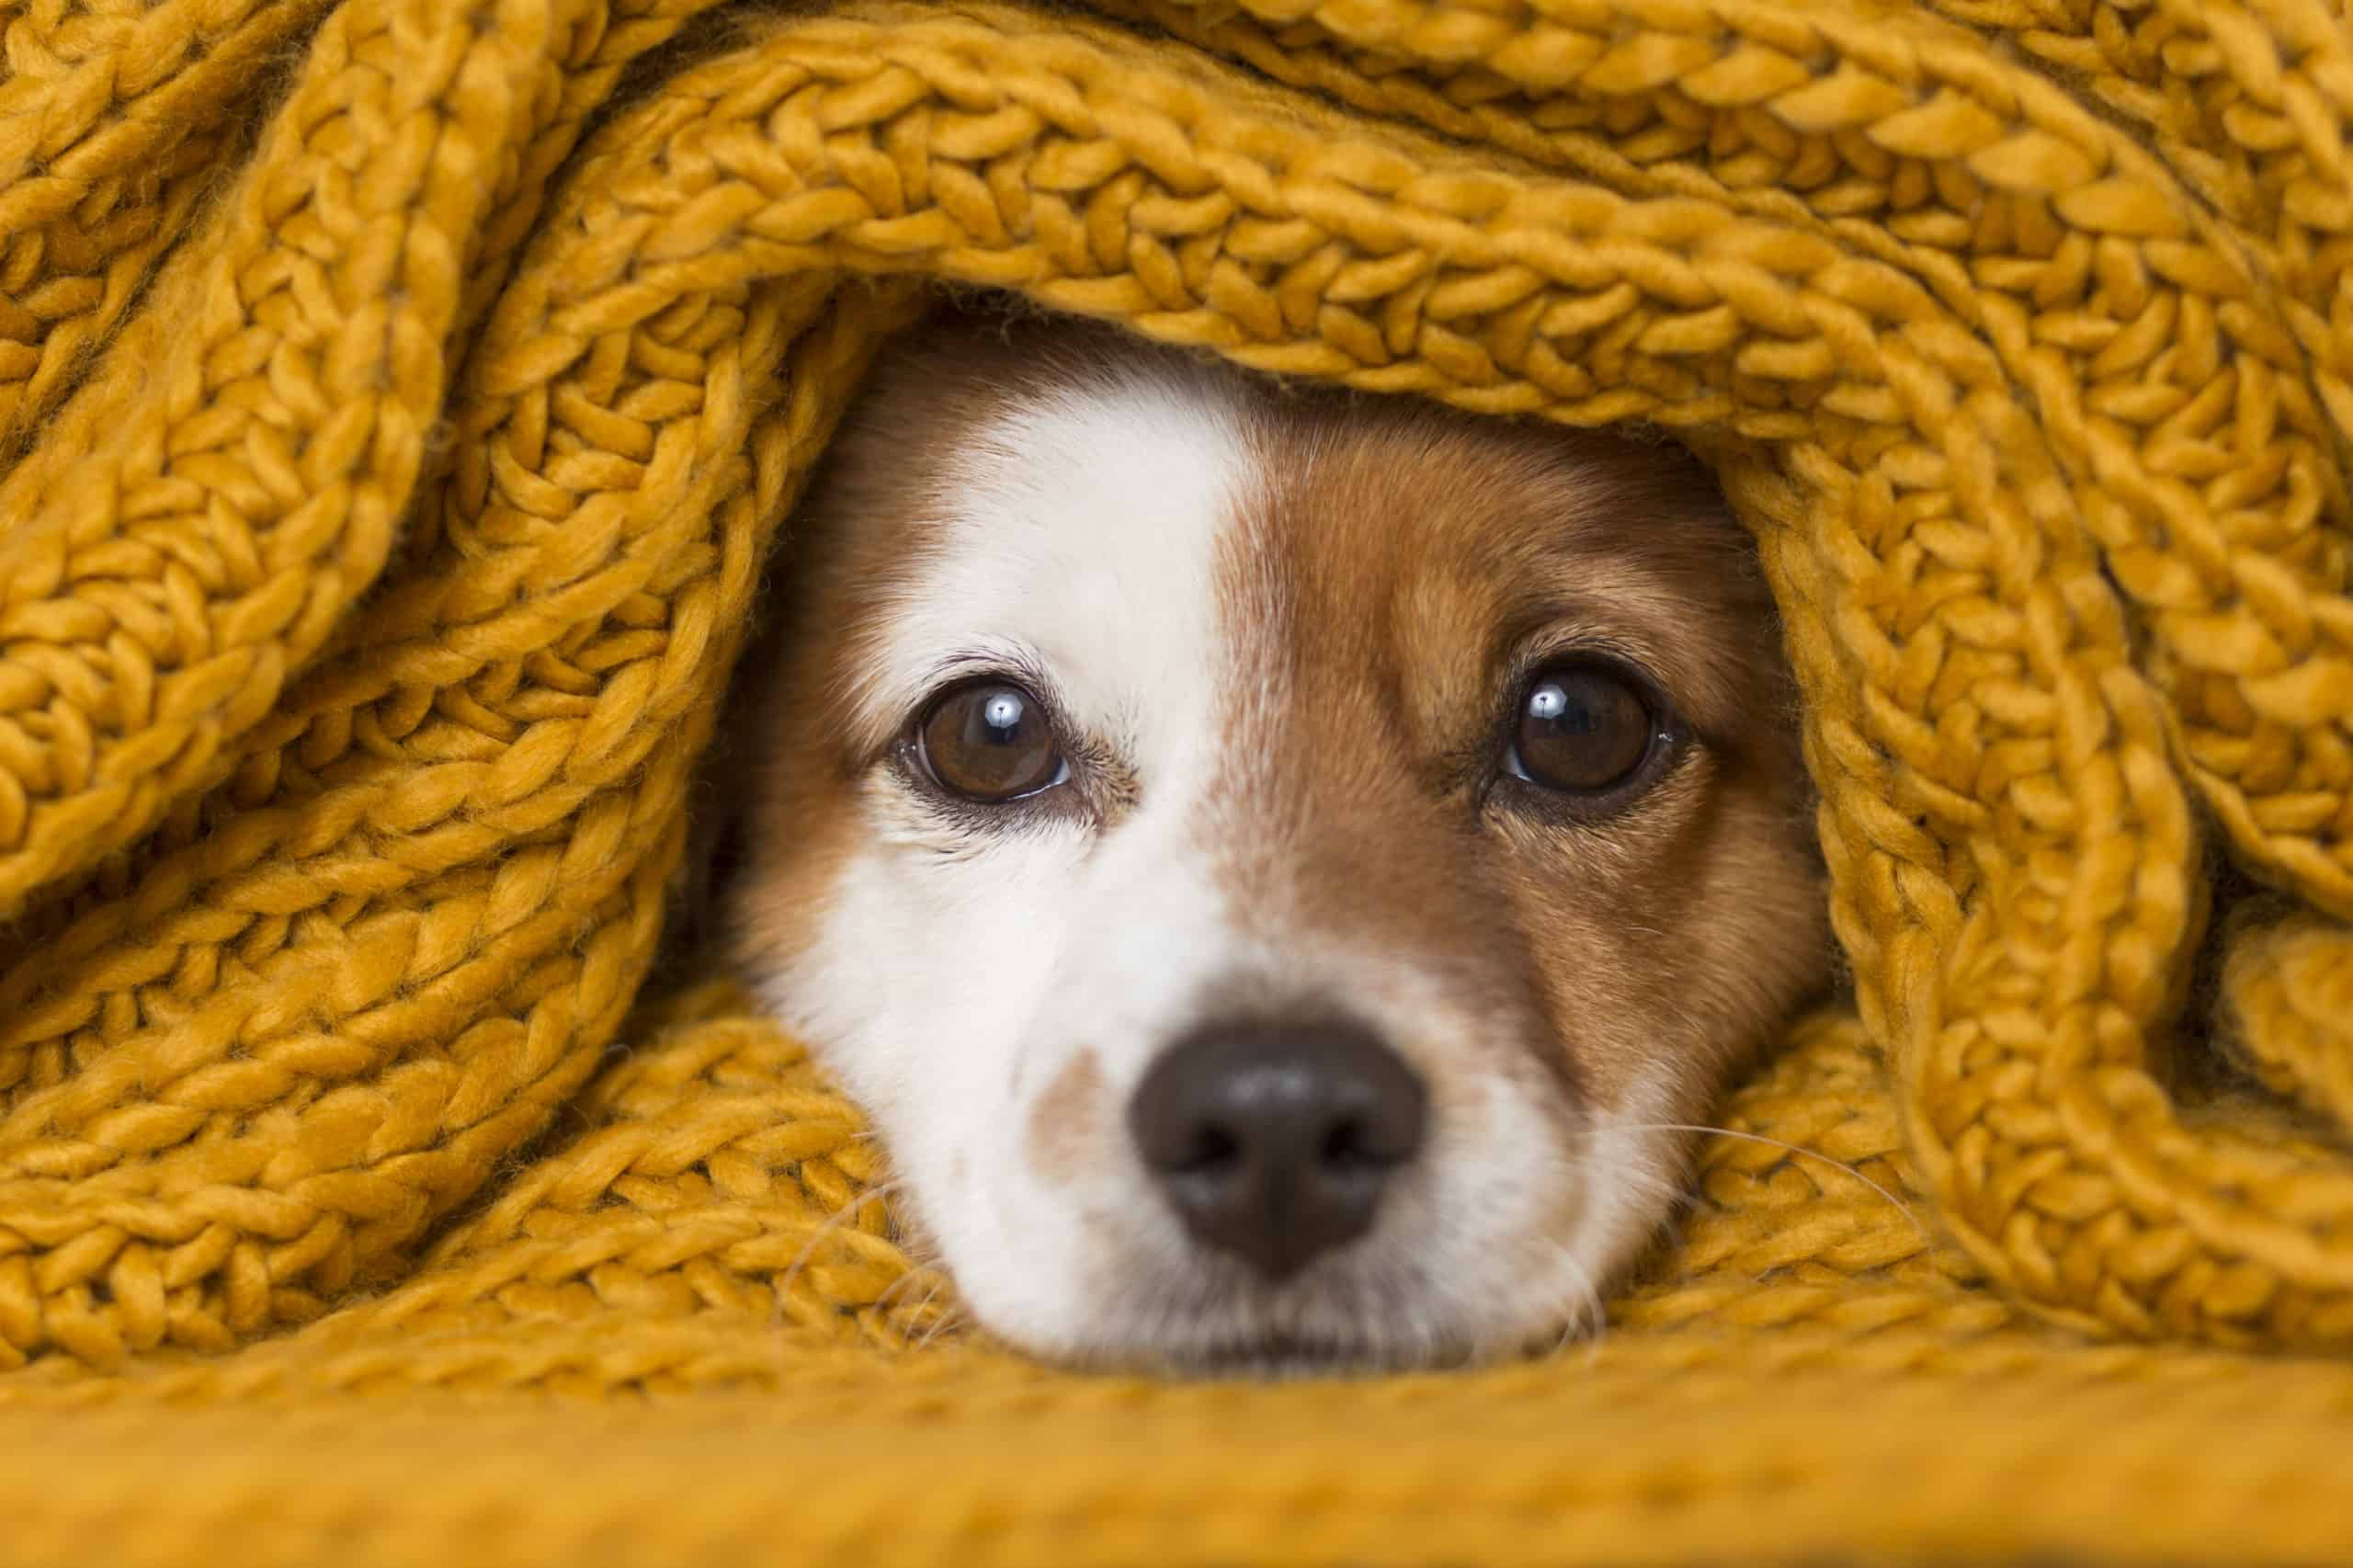 Why does my dog pee on blankets?